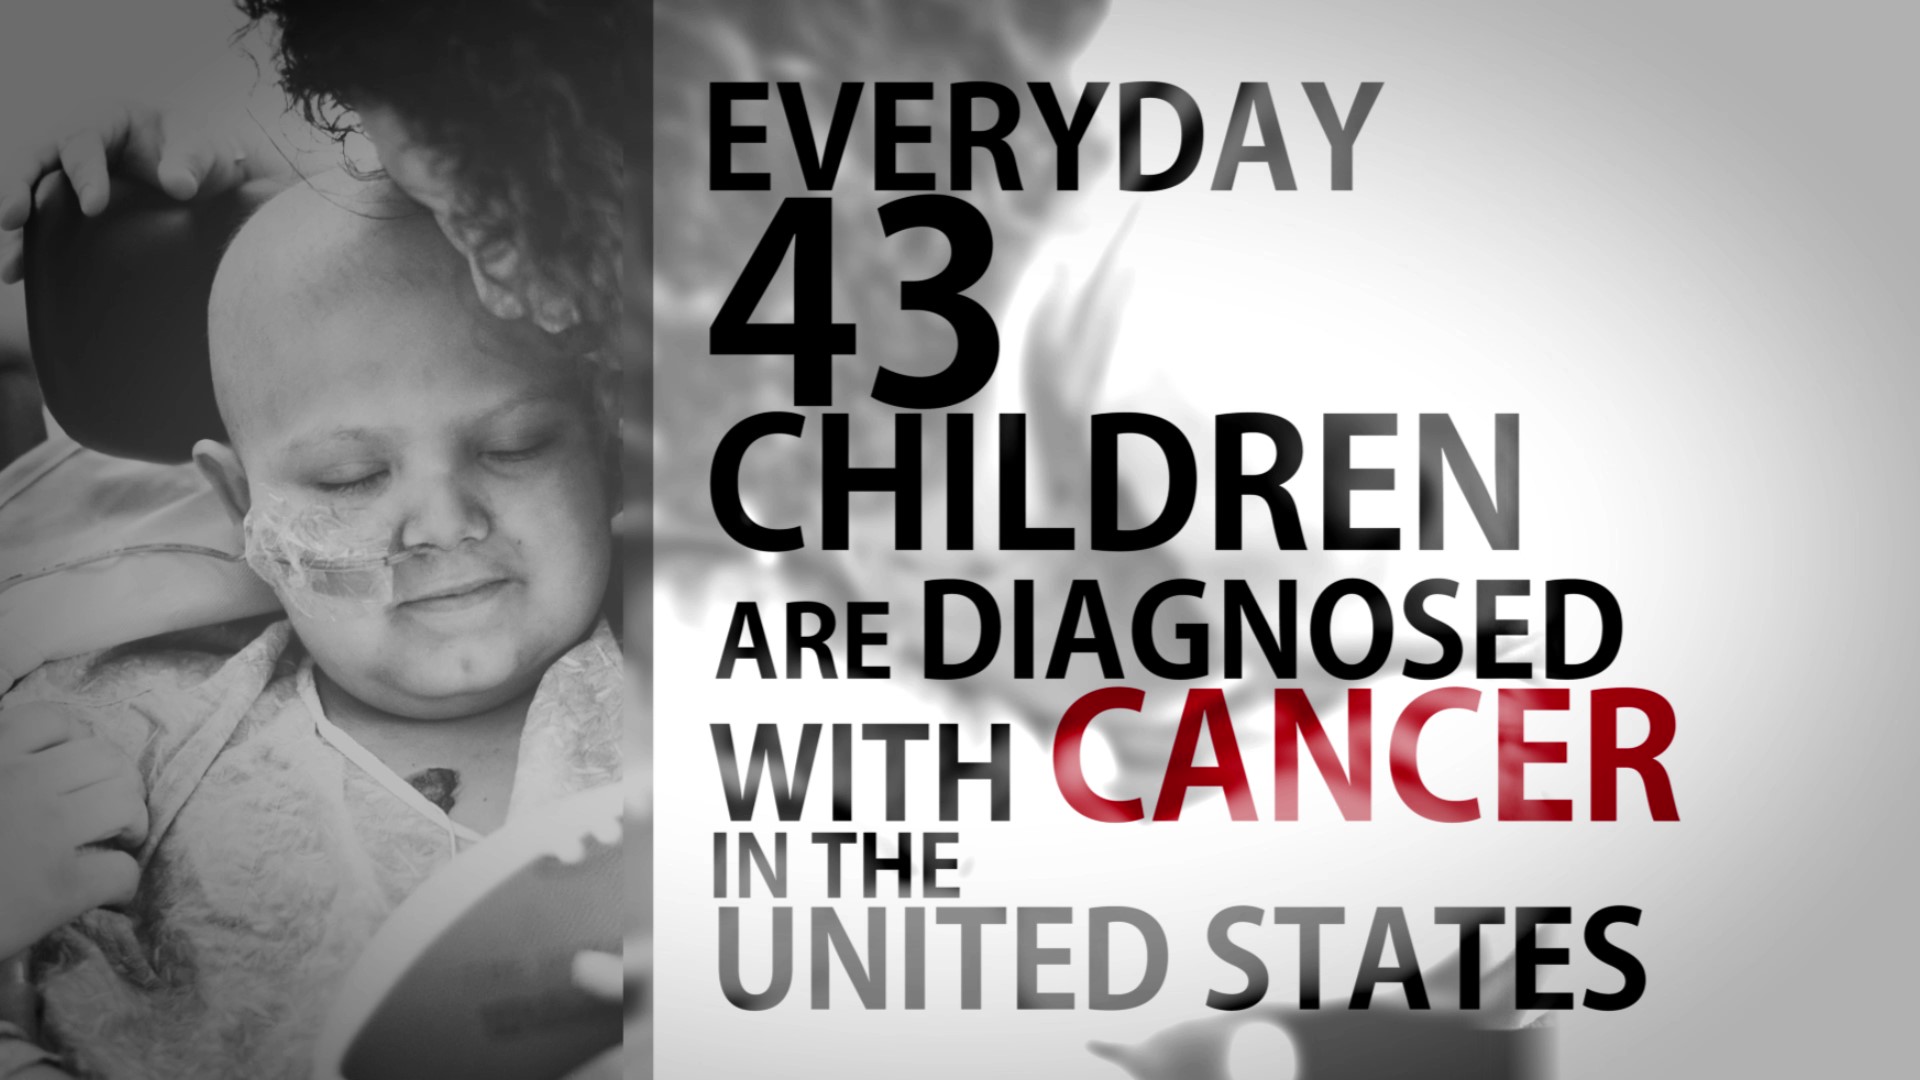 BCI, Jay Fund and TRF joint PSA in support of National Childhood Cancer Awareness Month